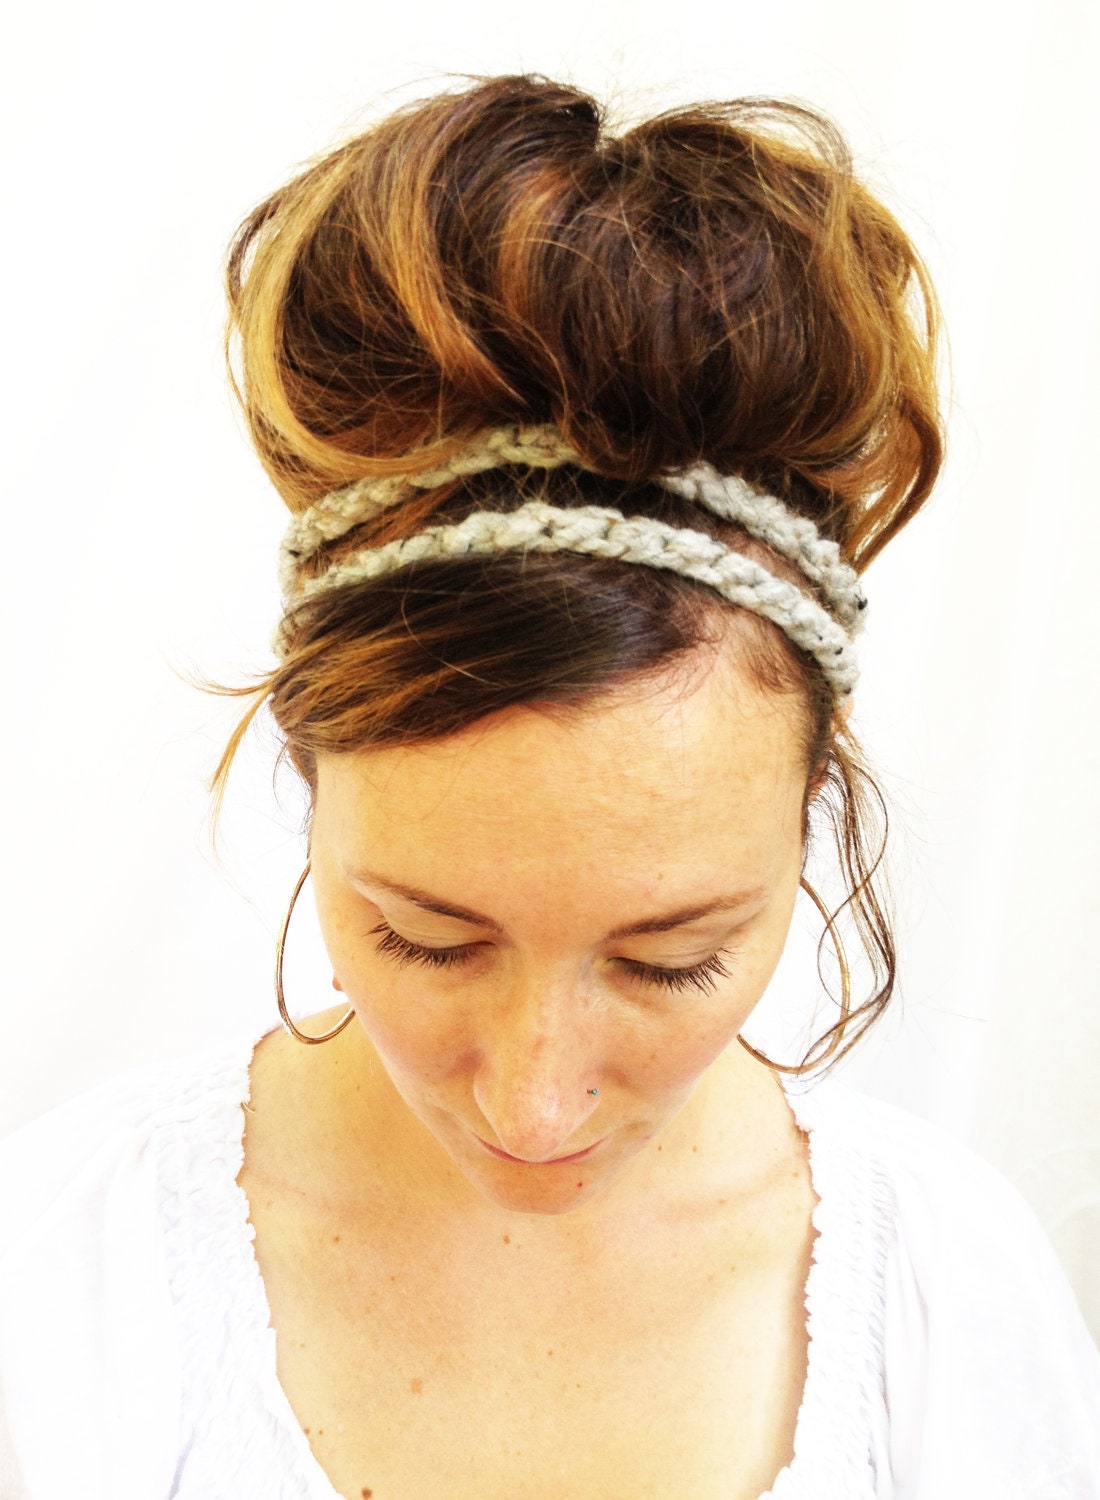 Gray Marble HEADBAND - Ages 4 to Adult, Stretchy, Acryic Wool Yarn, Elastic, Brown Bead, Double Strand, Hippie, Boho, Crochet, Yarnival. - theyarnival